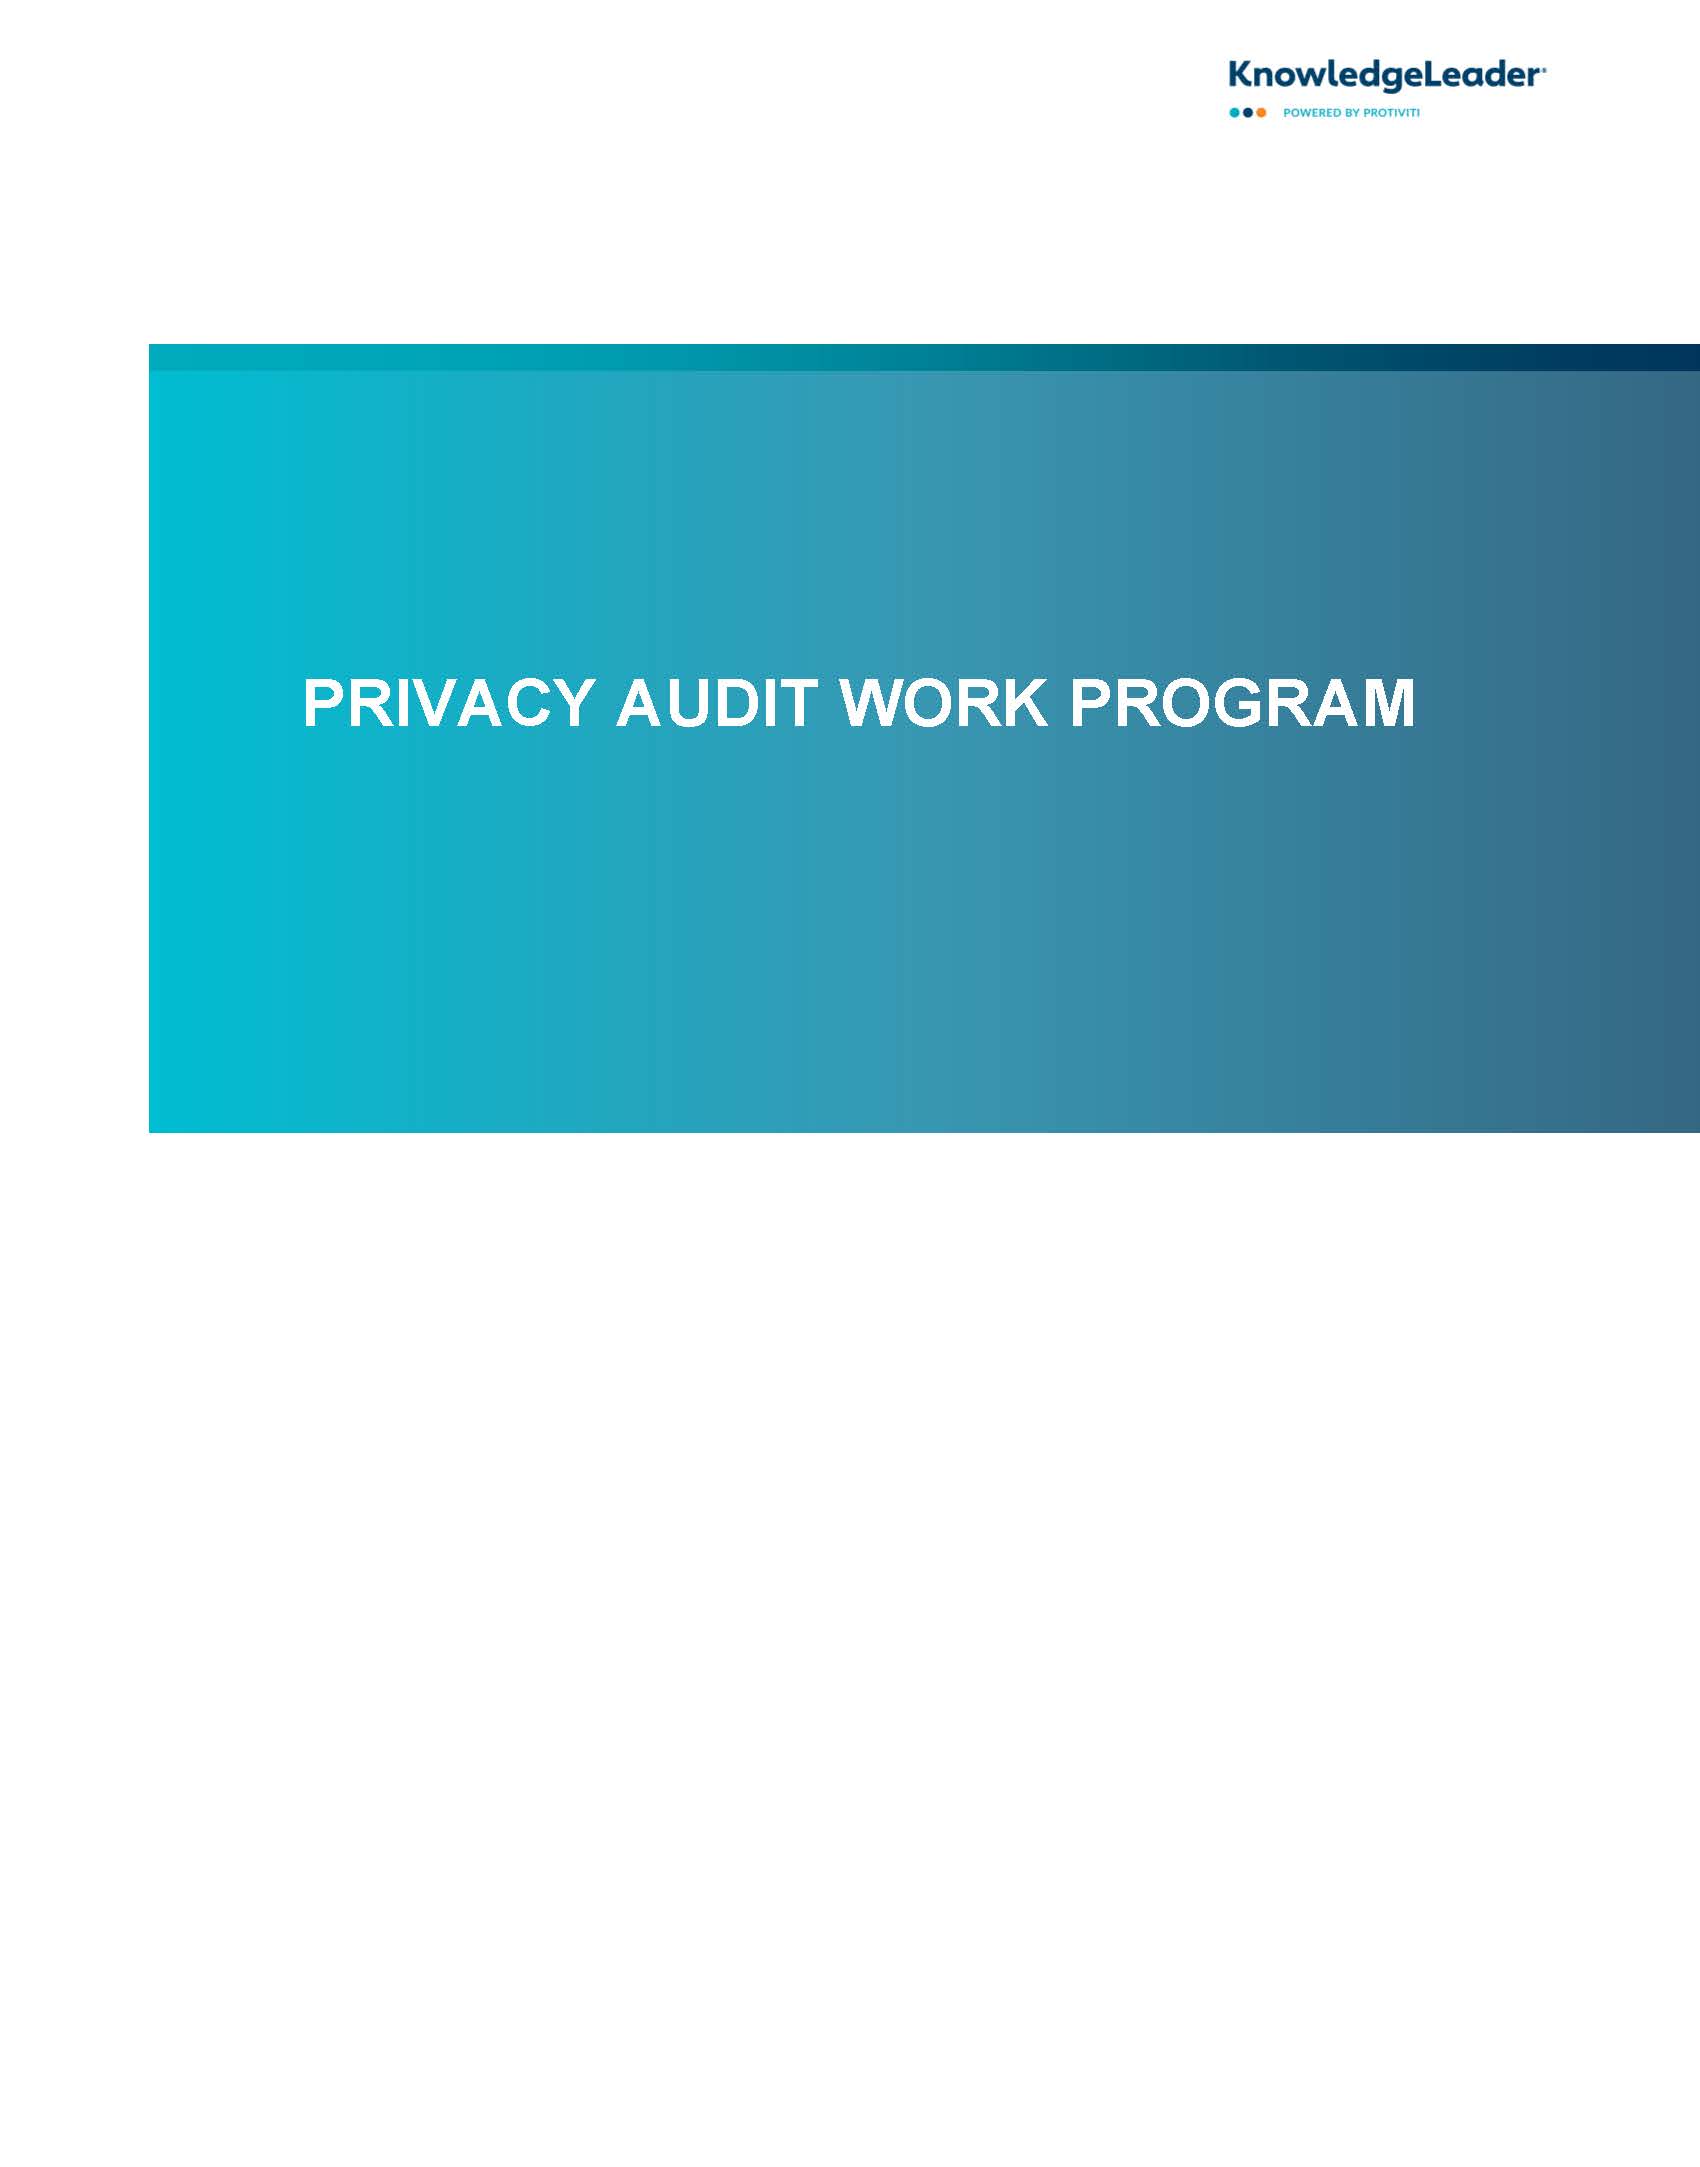 Screenshot of the first page of Privacy Audit Work Program